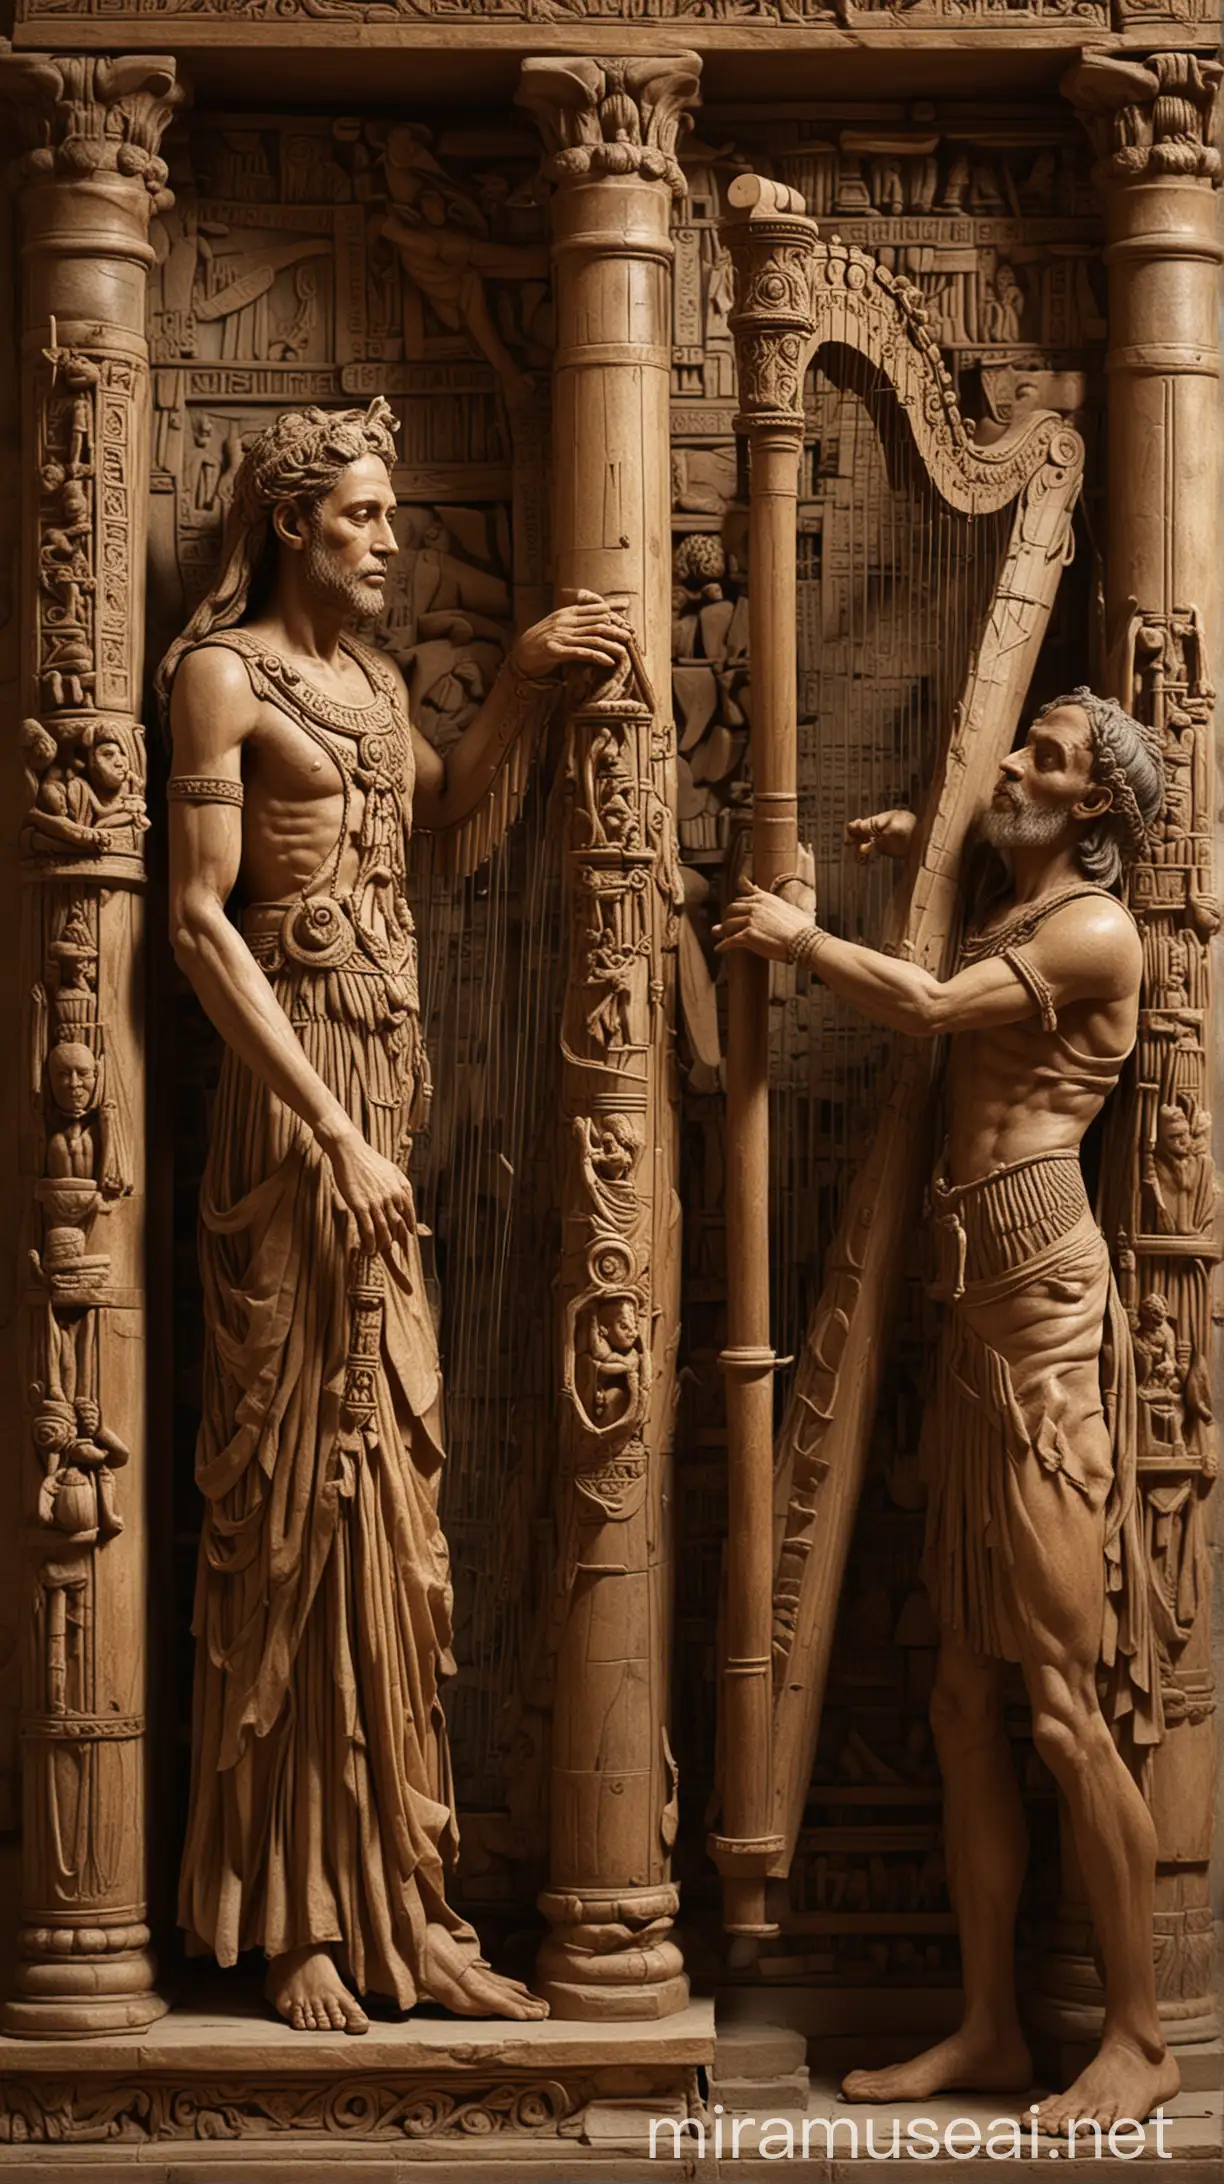 Ancient Musicians Playing Harp and Organ in Early Human Gathering